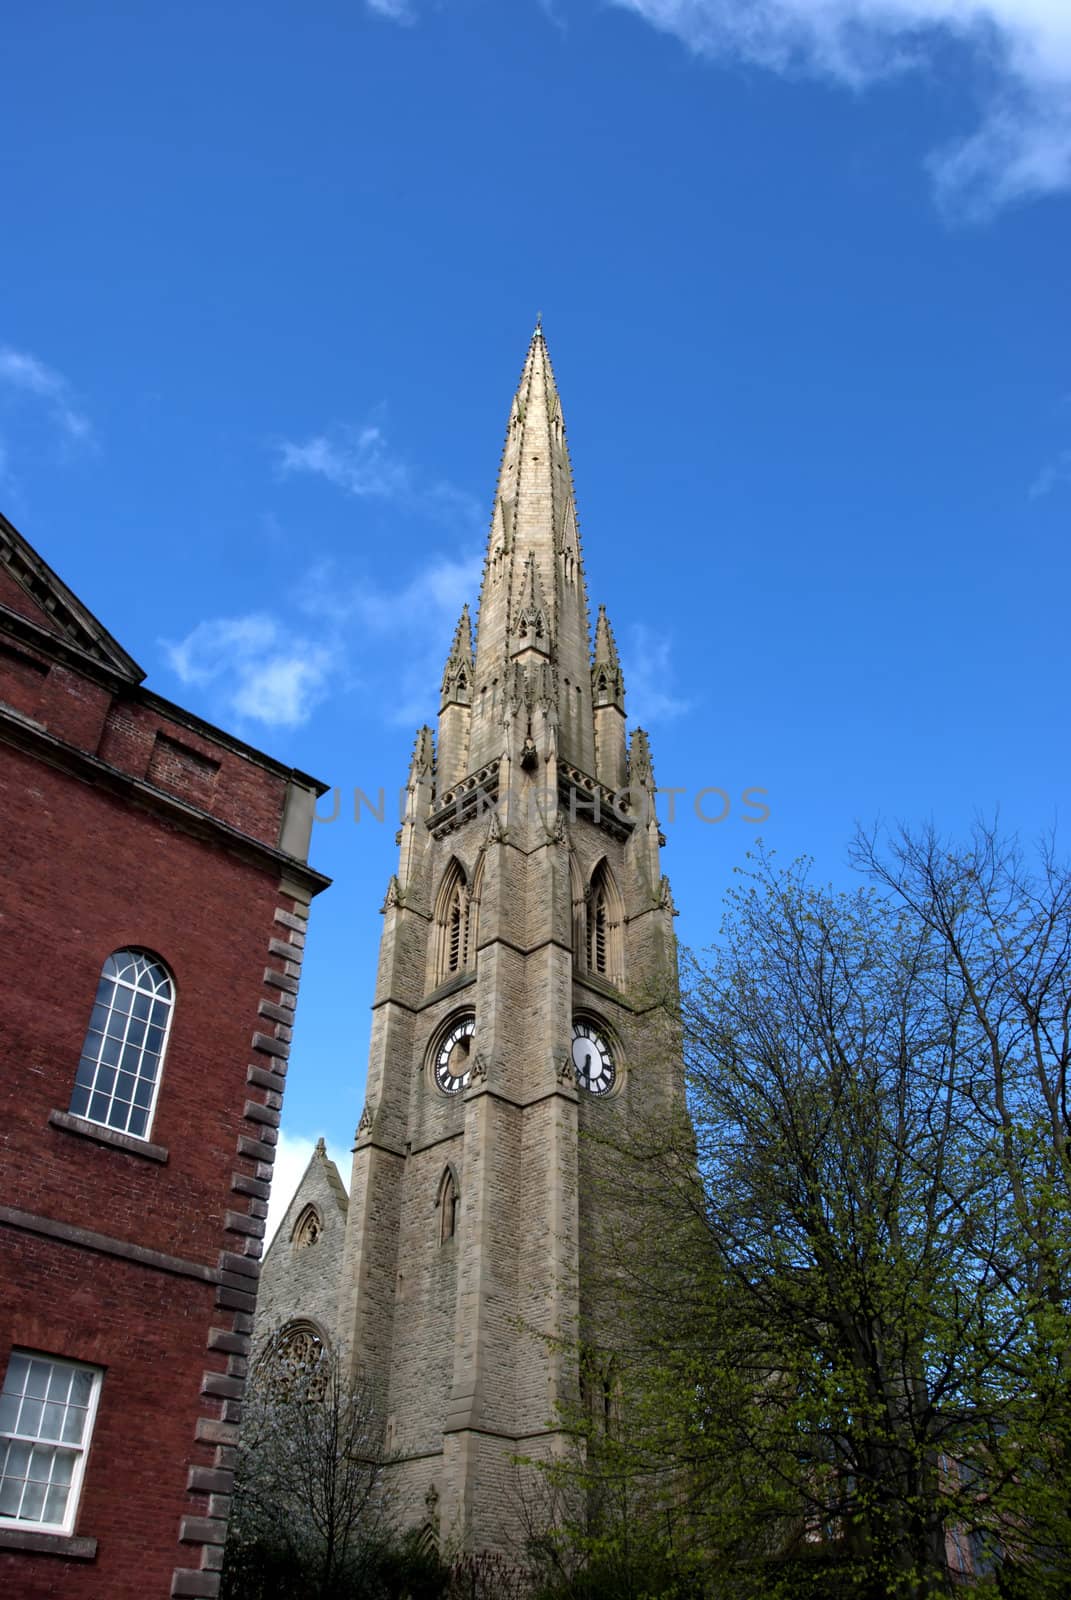 The Spire of a ruined church  in Yorkshire against a blue sky